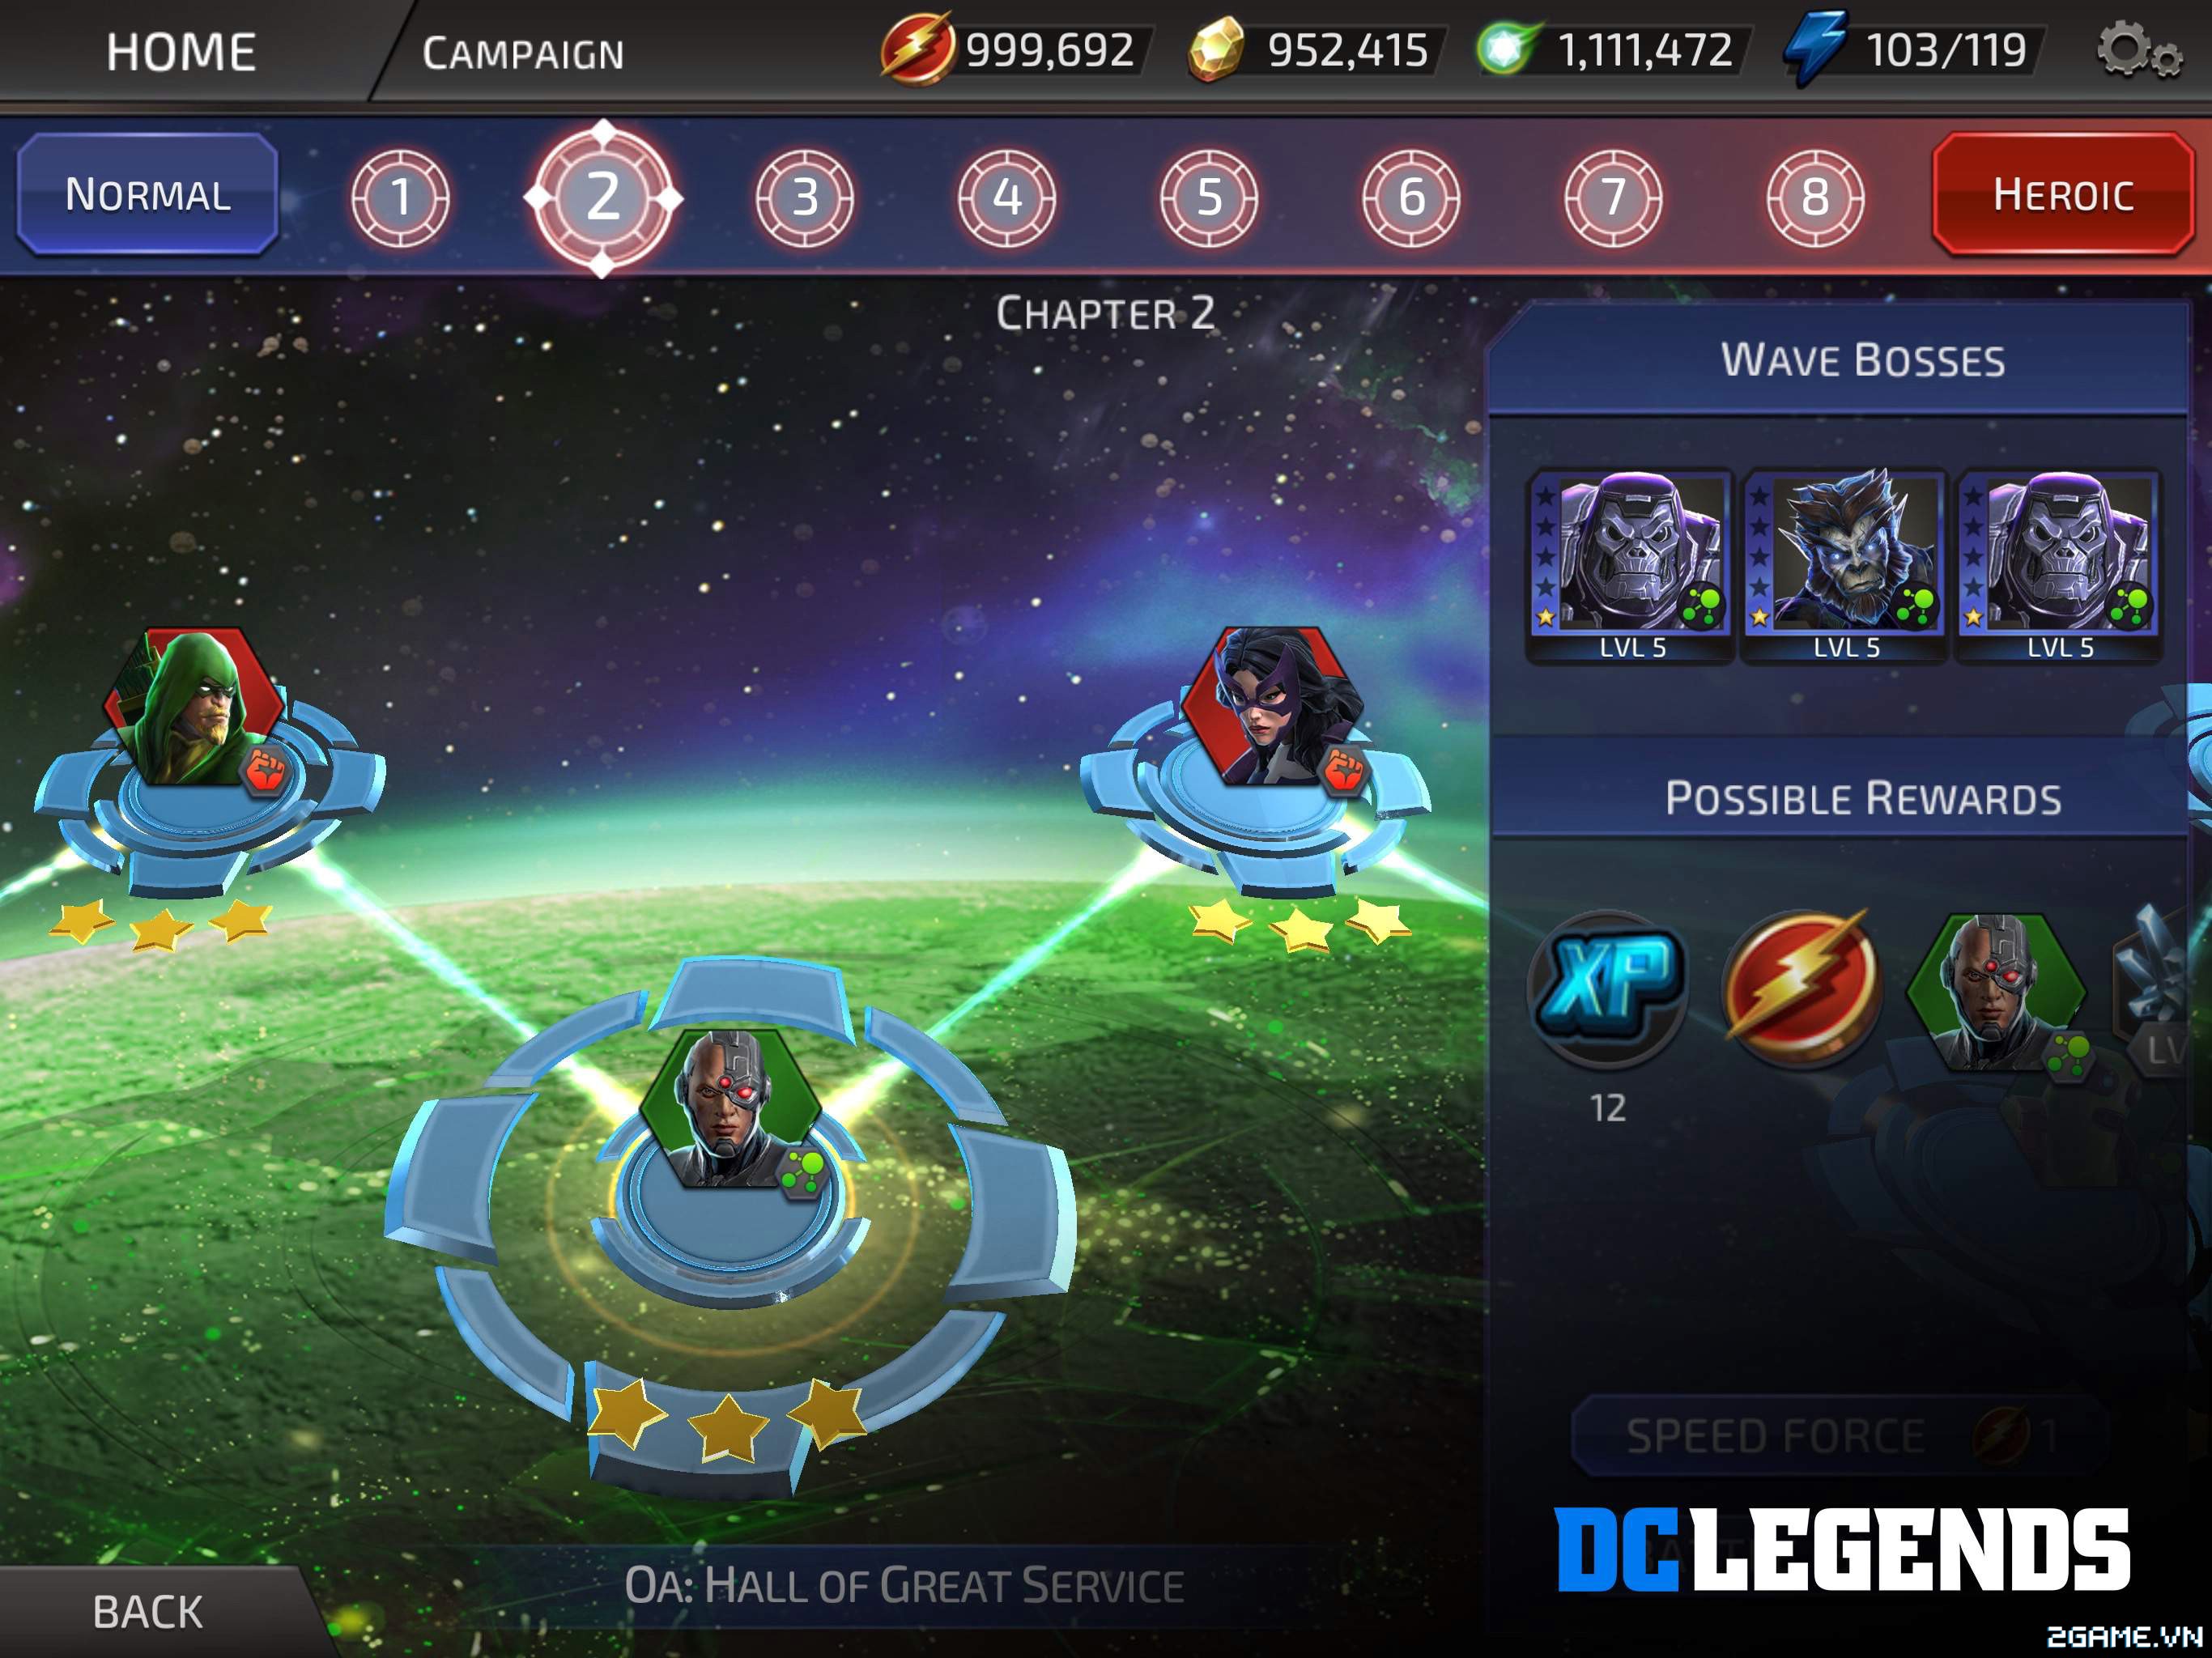 2game-DC-Legends-Mobile-danh-gia-7s.jpg (2732×2048)